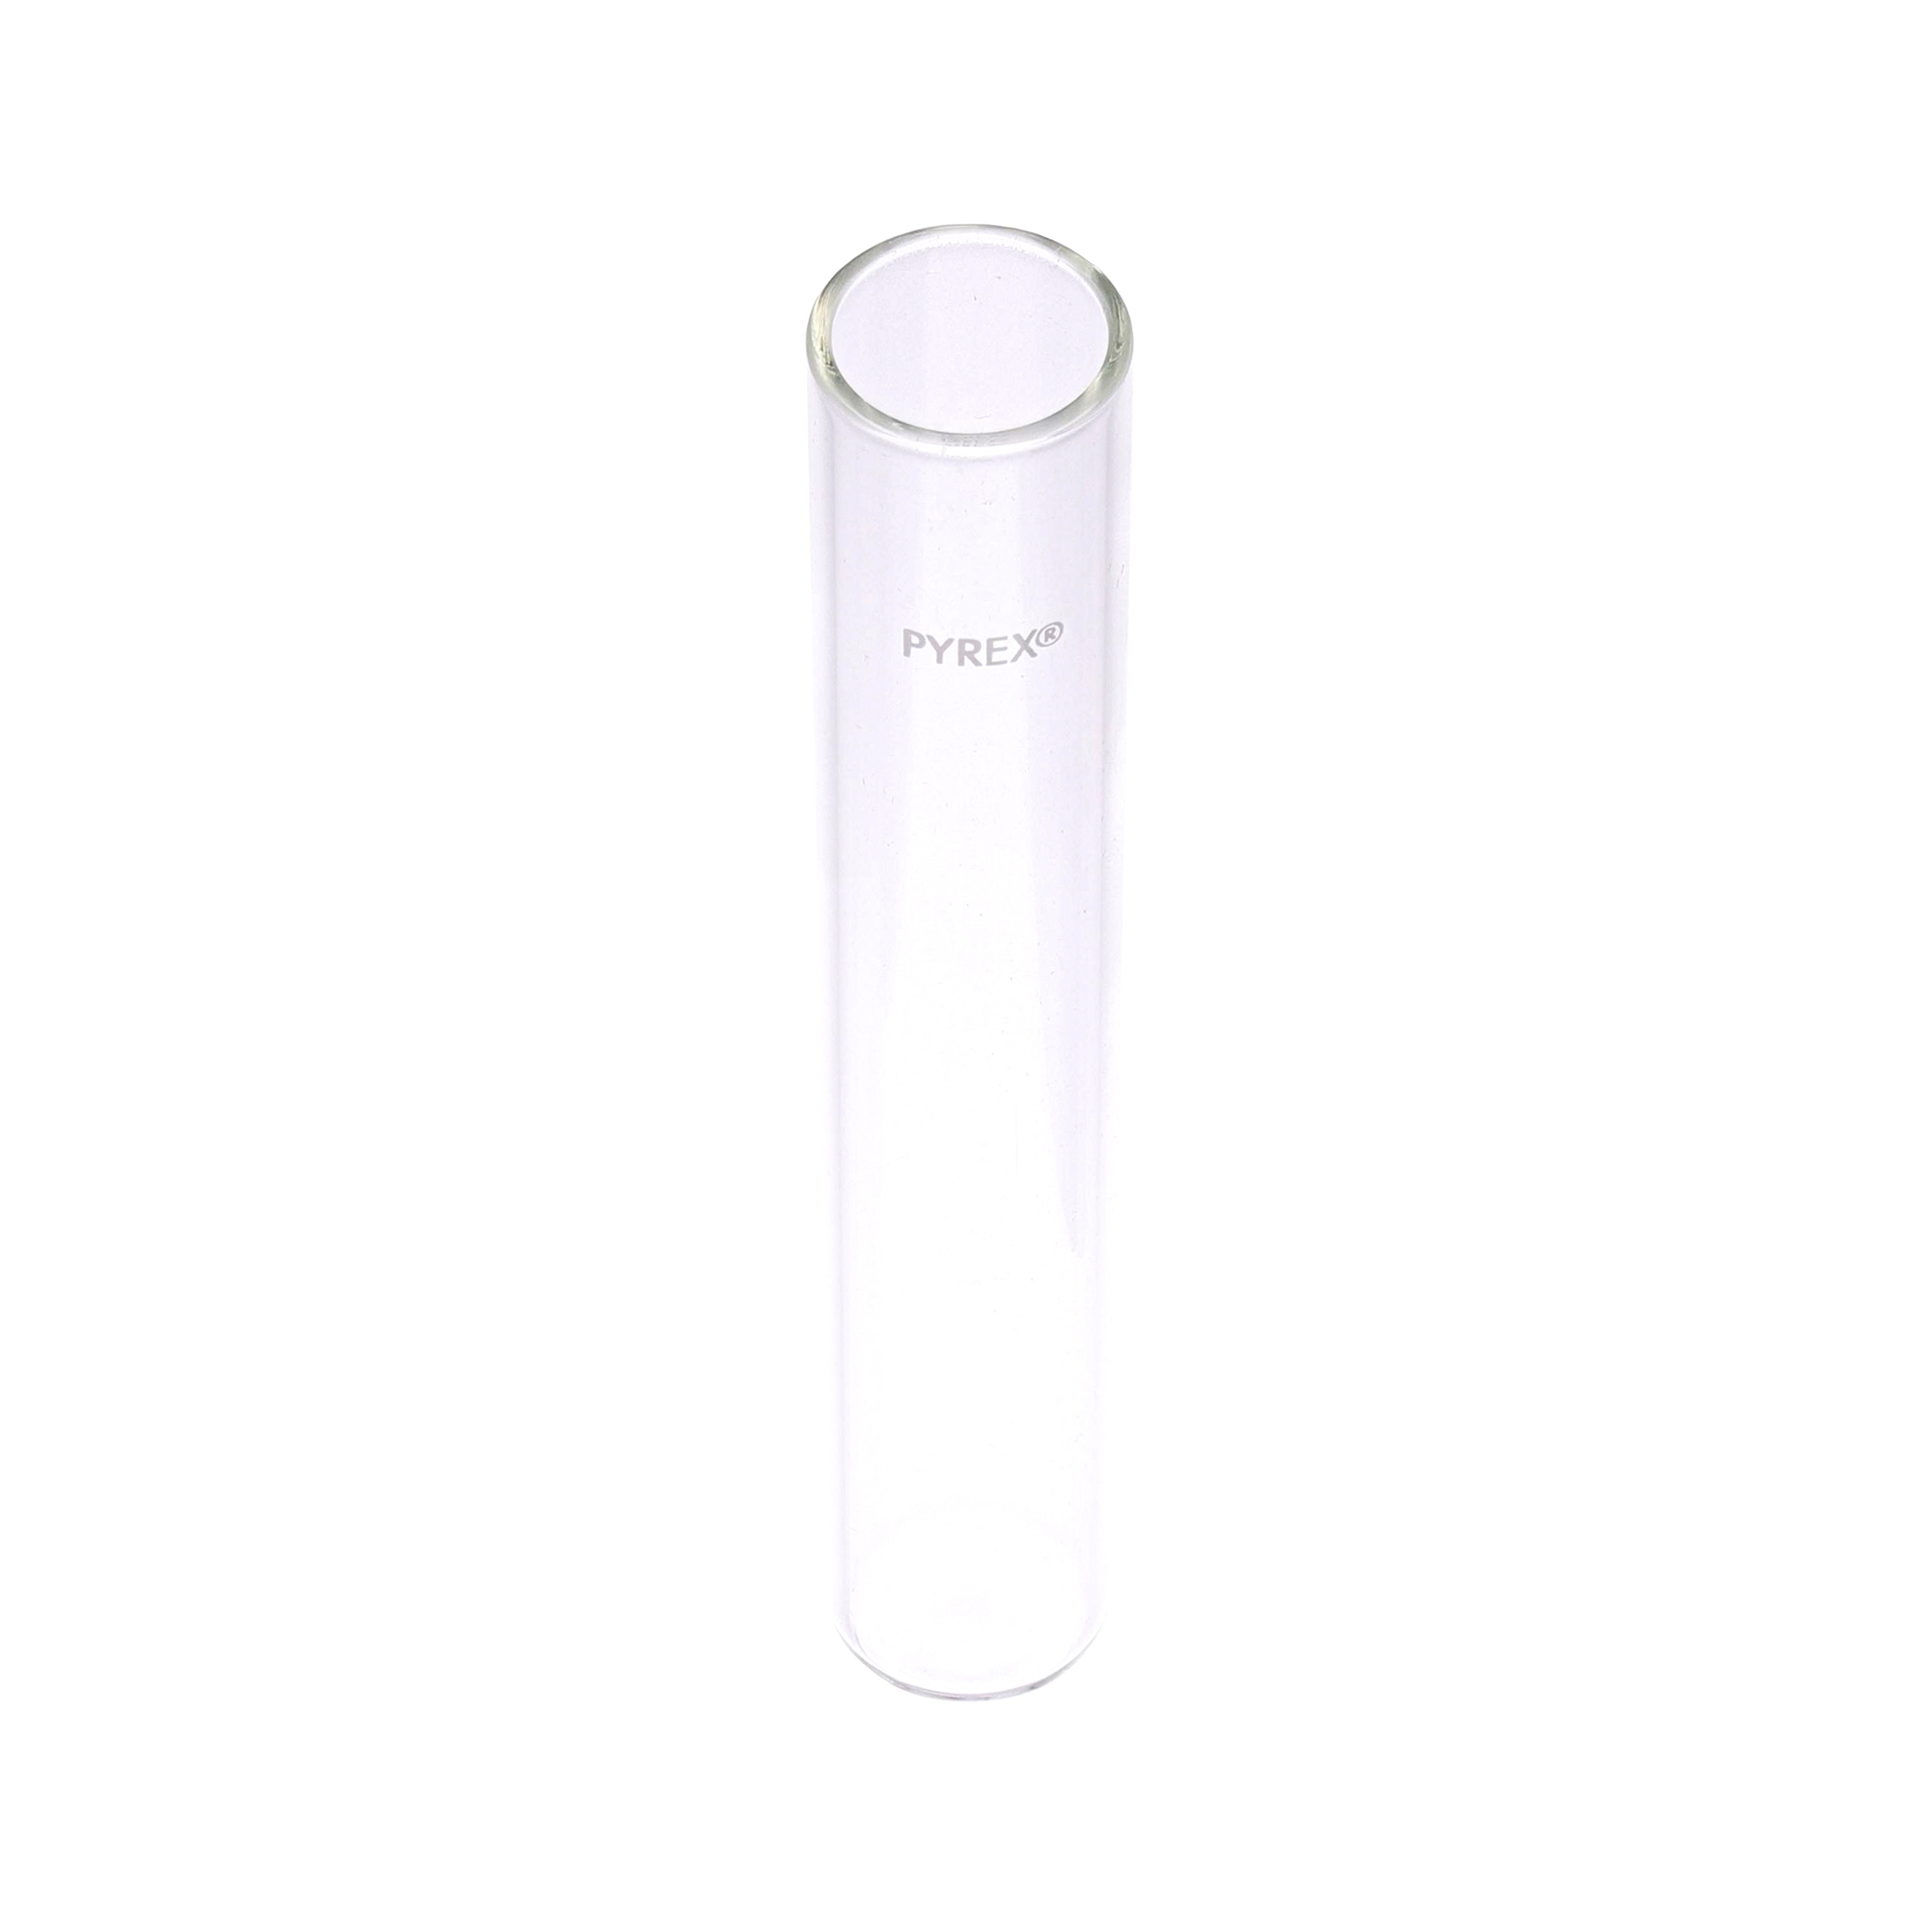 B8a85595 Pyrex Medium Wall Glass Test Tube Without Rim 16 X 125mm Pack Of 100 Philip Harris